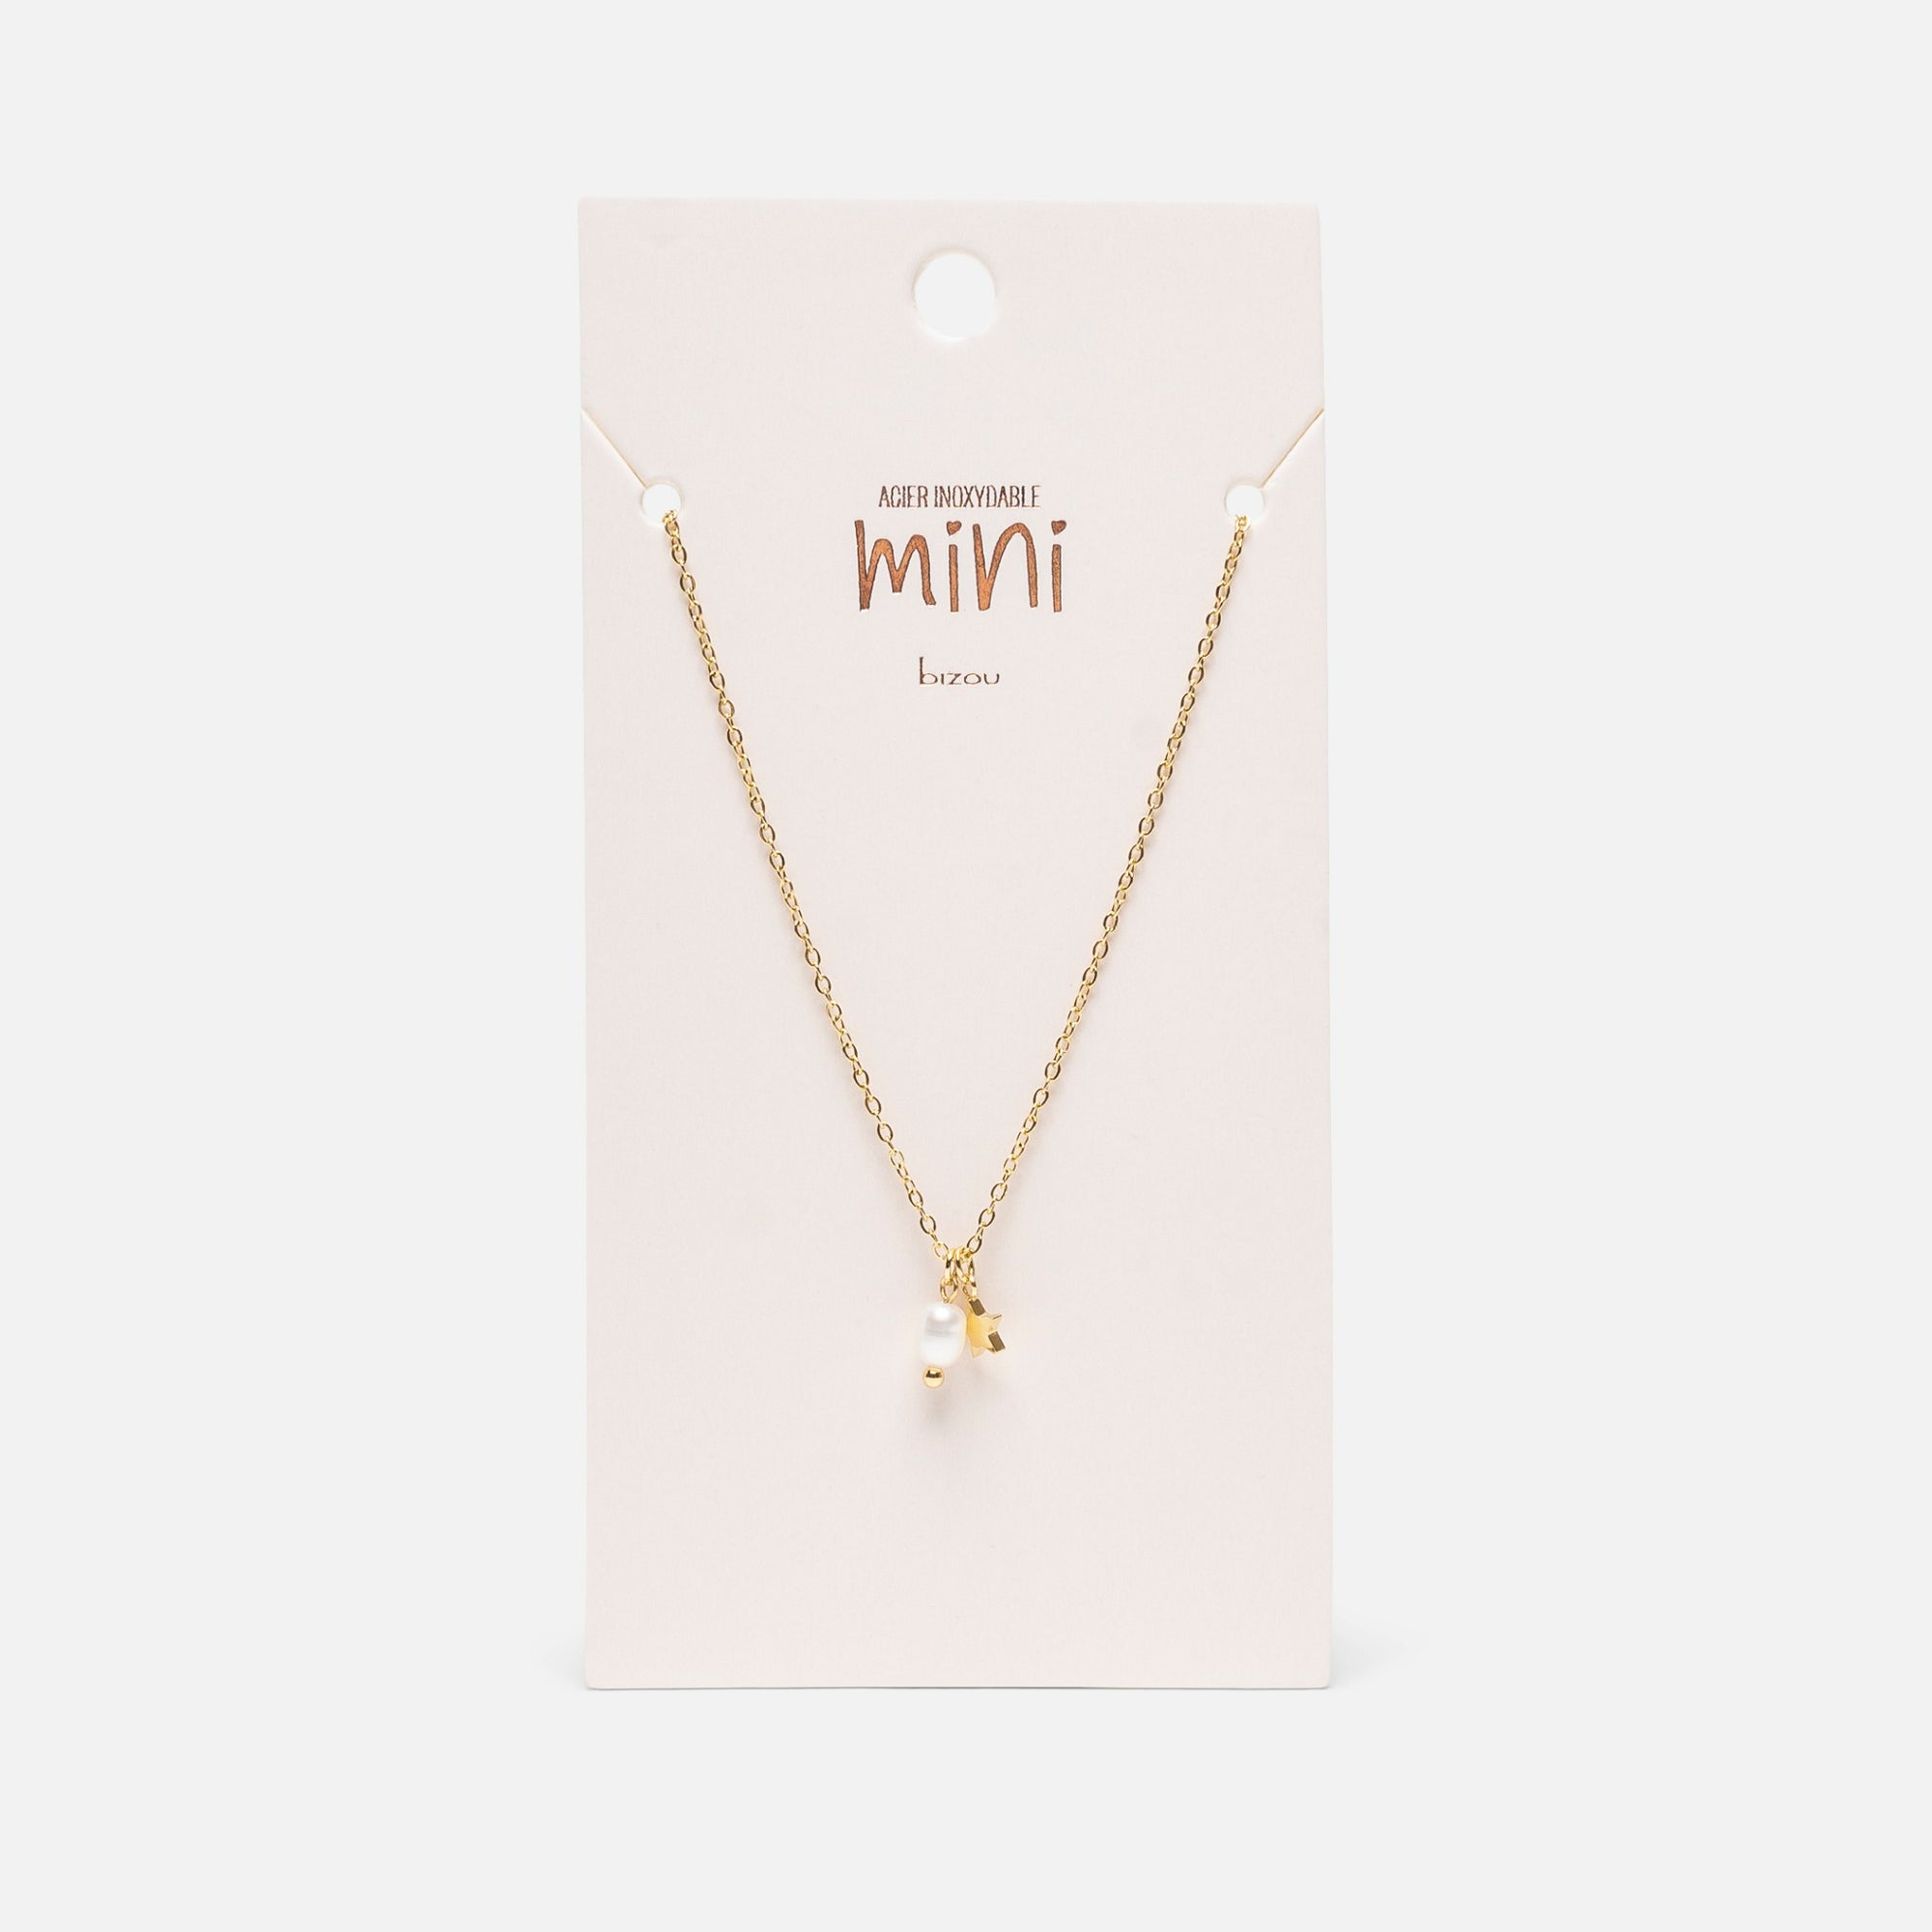 Mini golden necklace with star and pearl charms in stainless steel